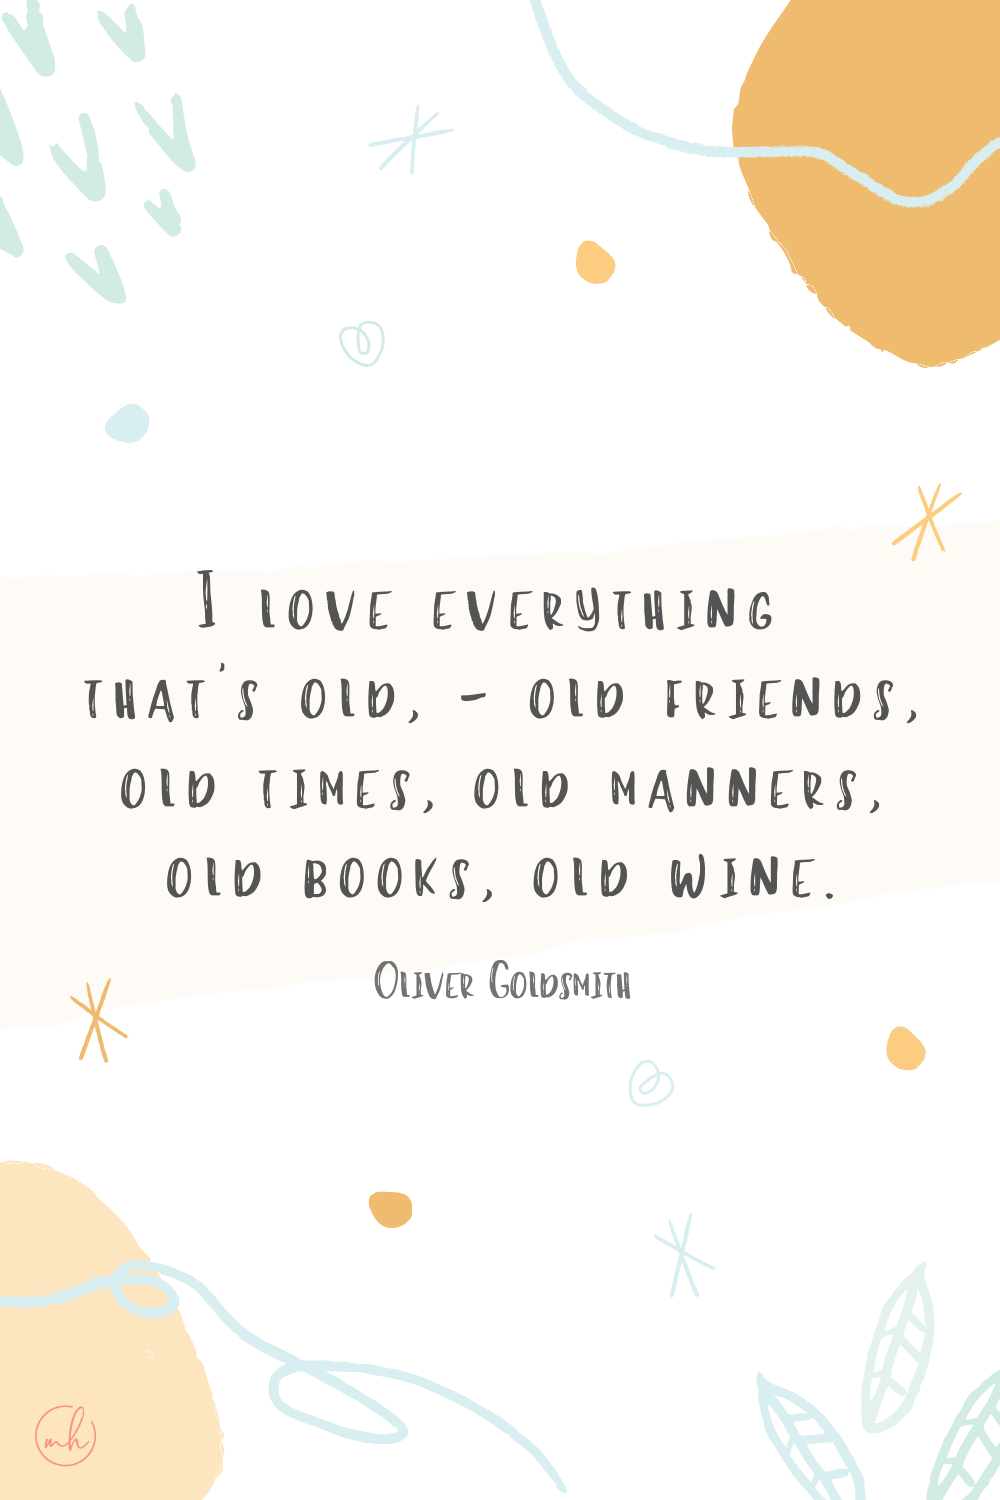 “I love everything that's old, — old friends, old times, old manners, old books, old wine.” - Oliver Goldsmith